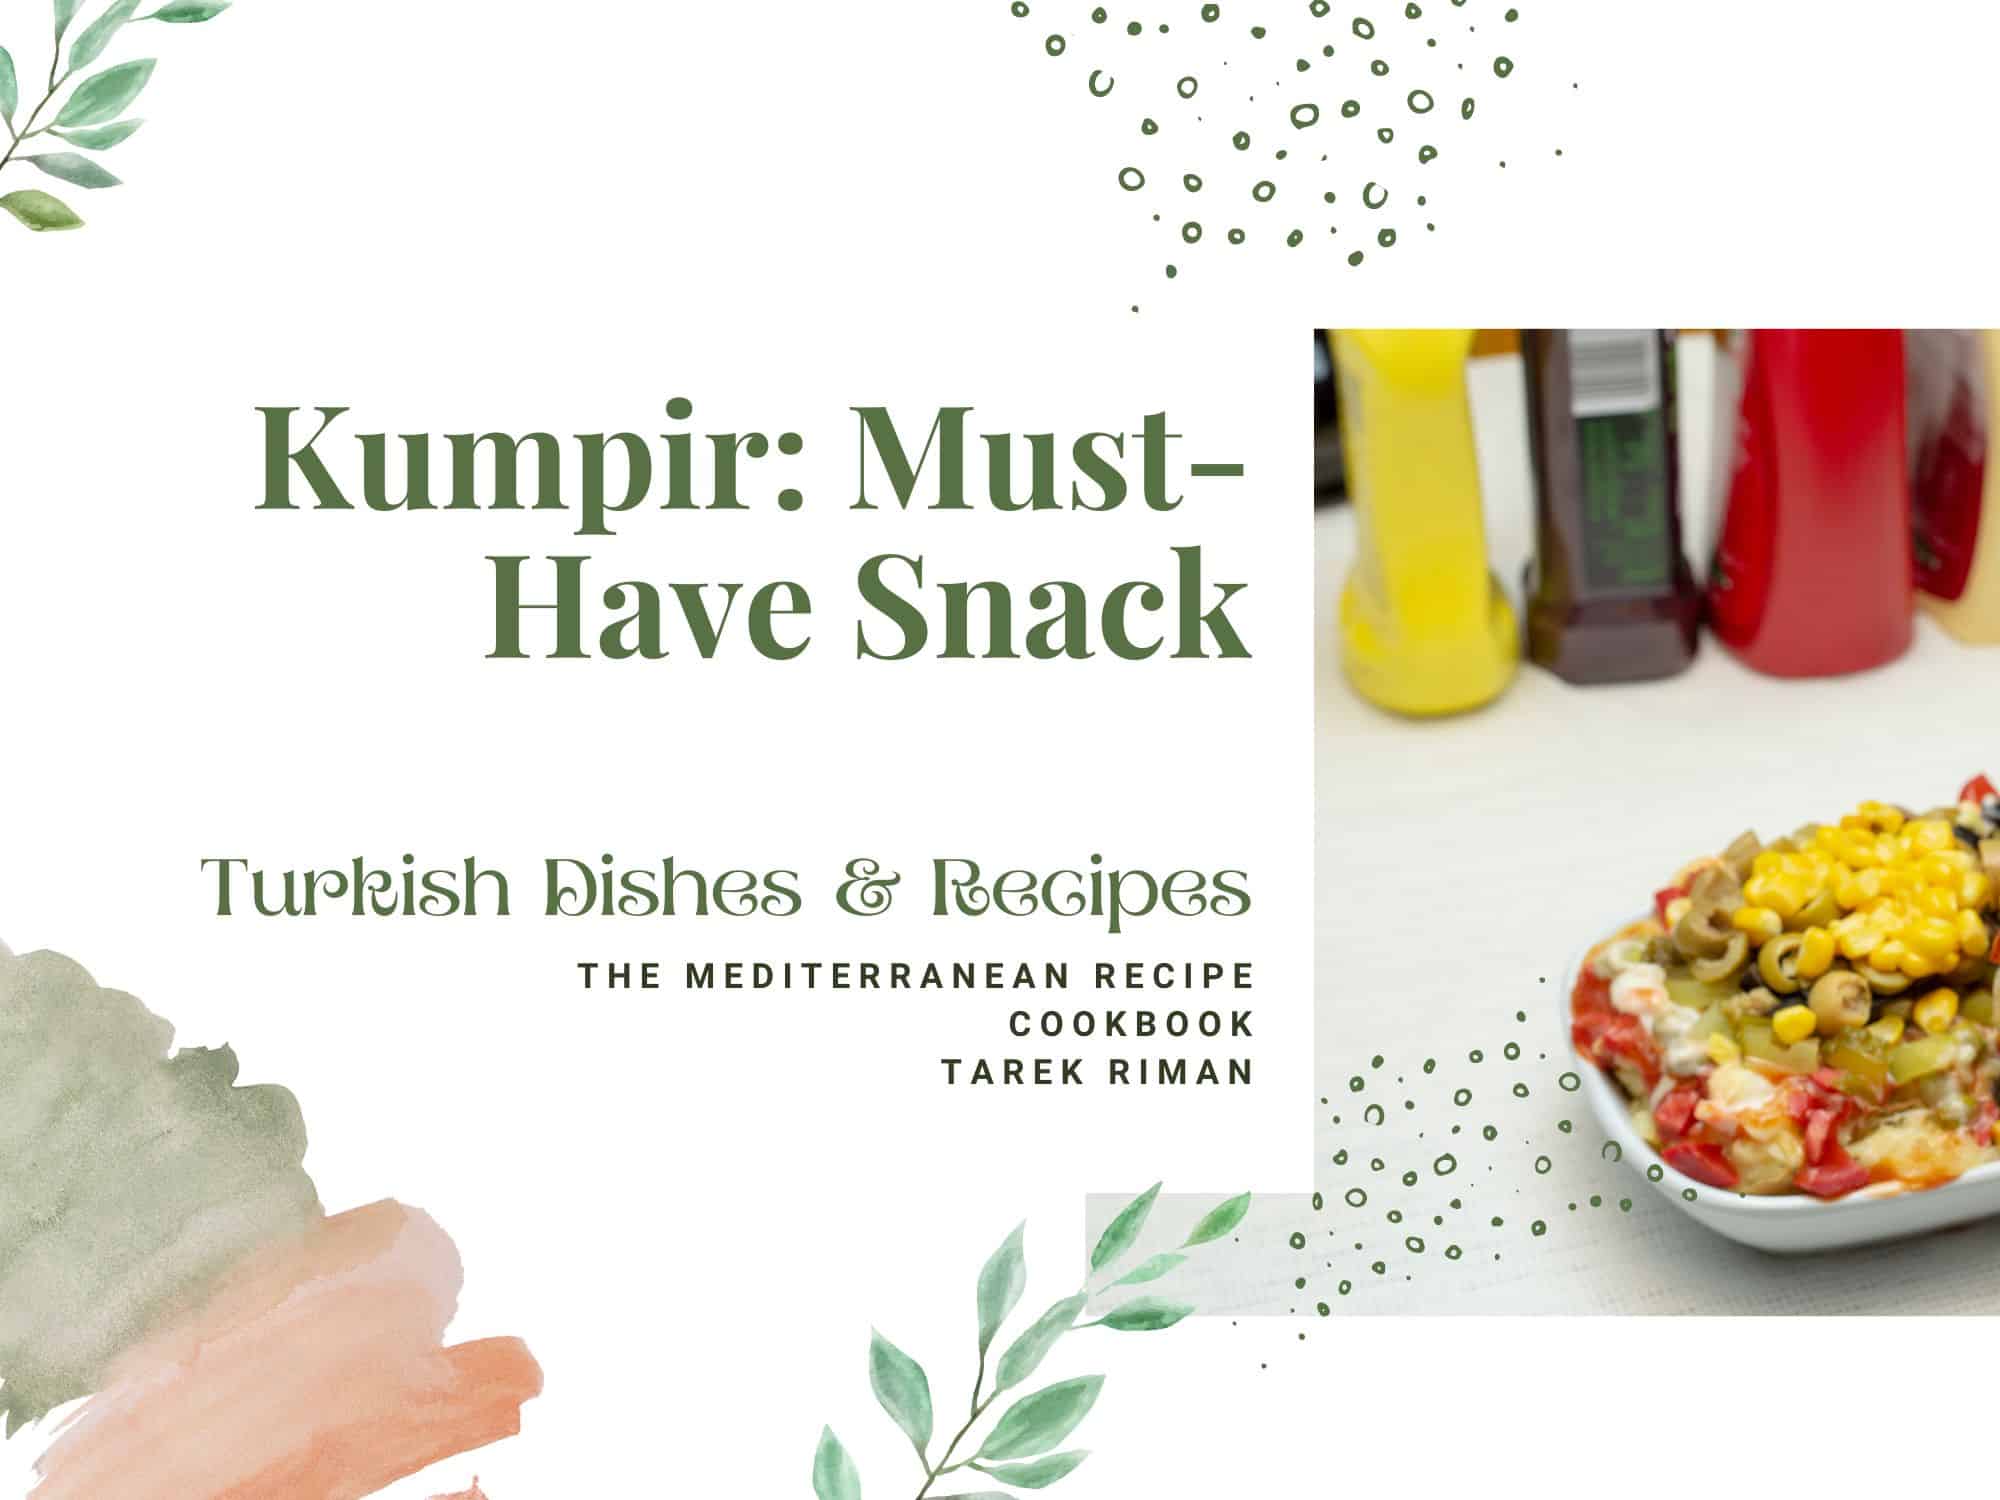 How to make Kumpir: Must-Have Snack